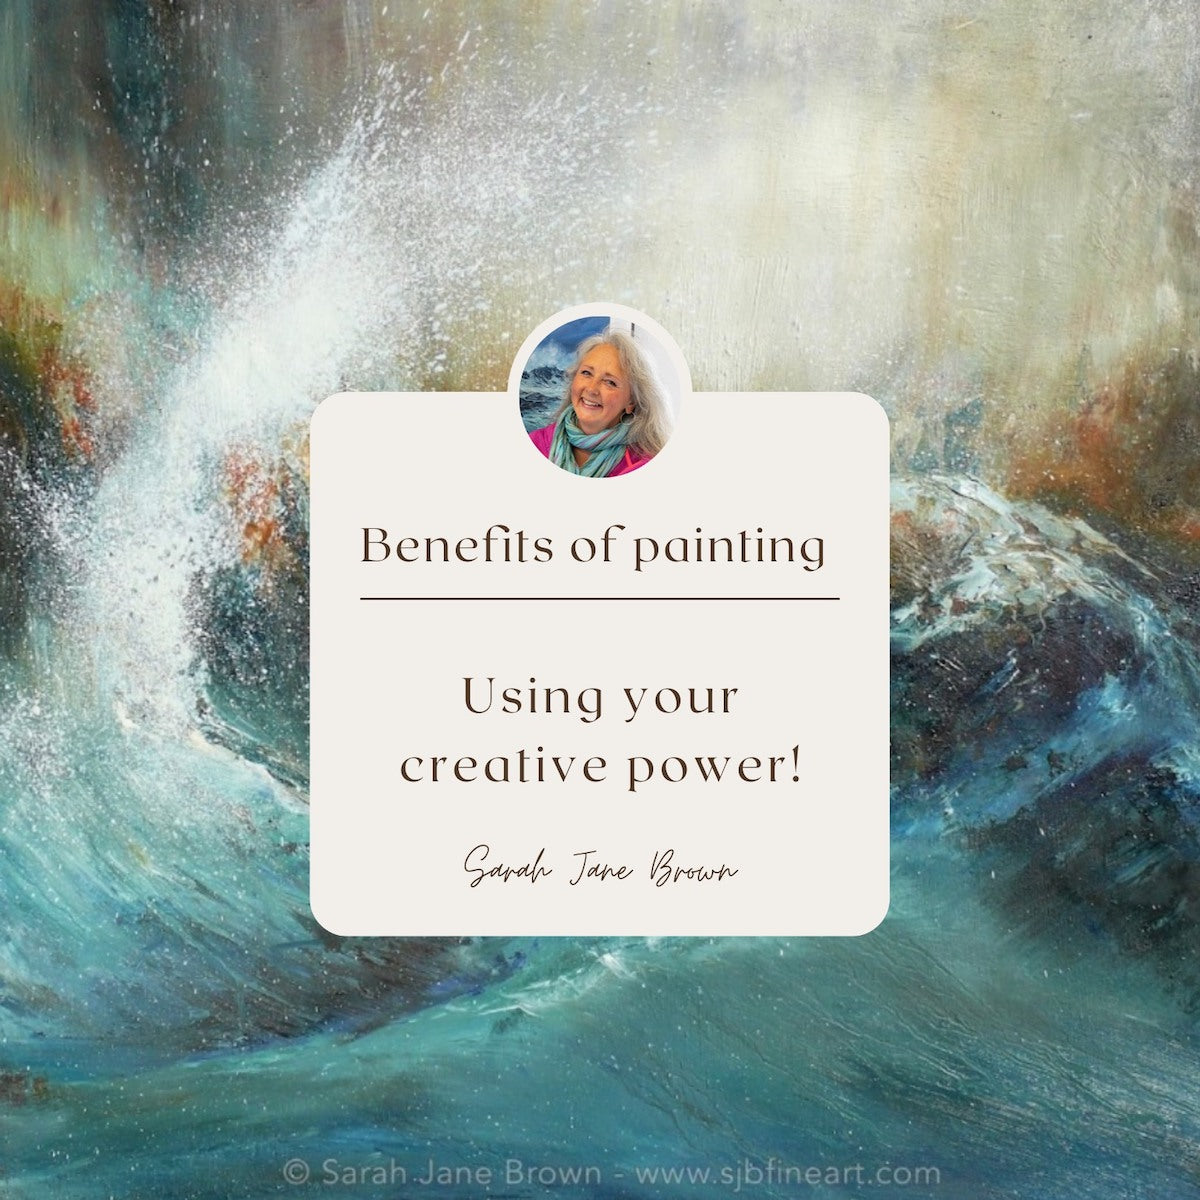 Benefits of painting: using your creative power